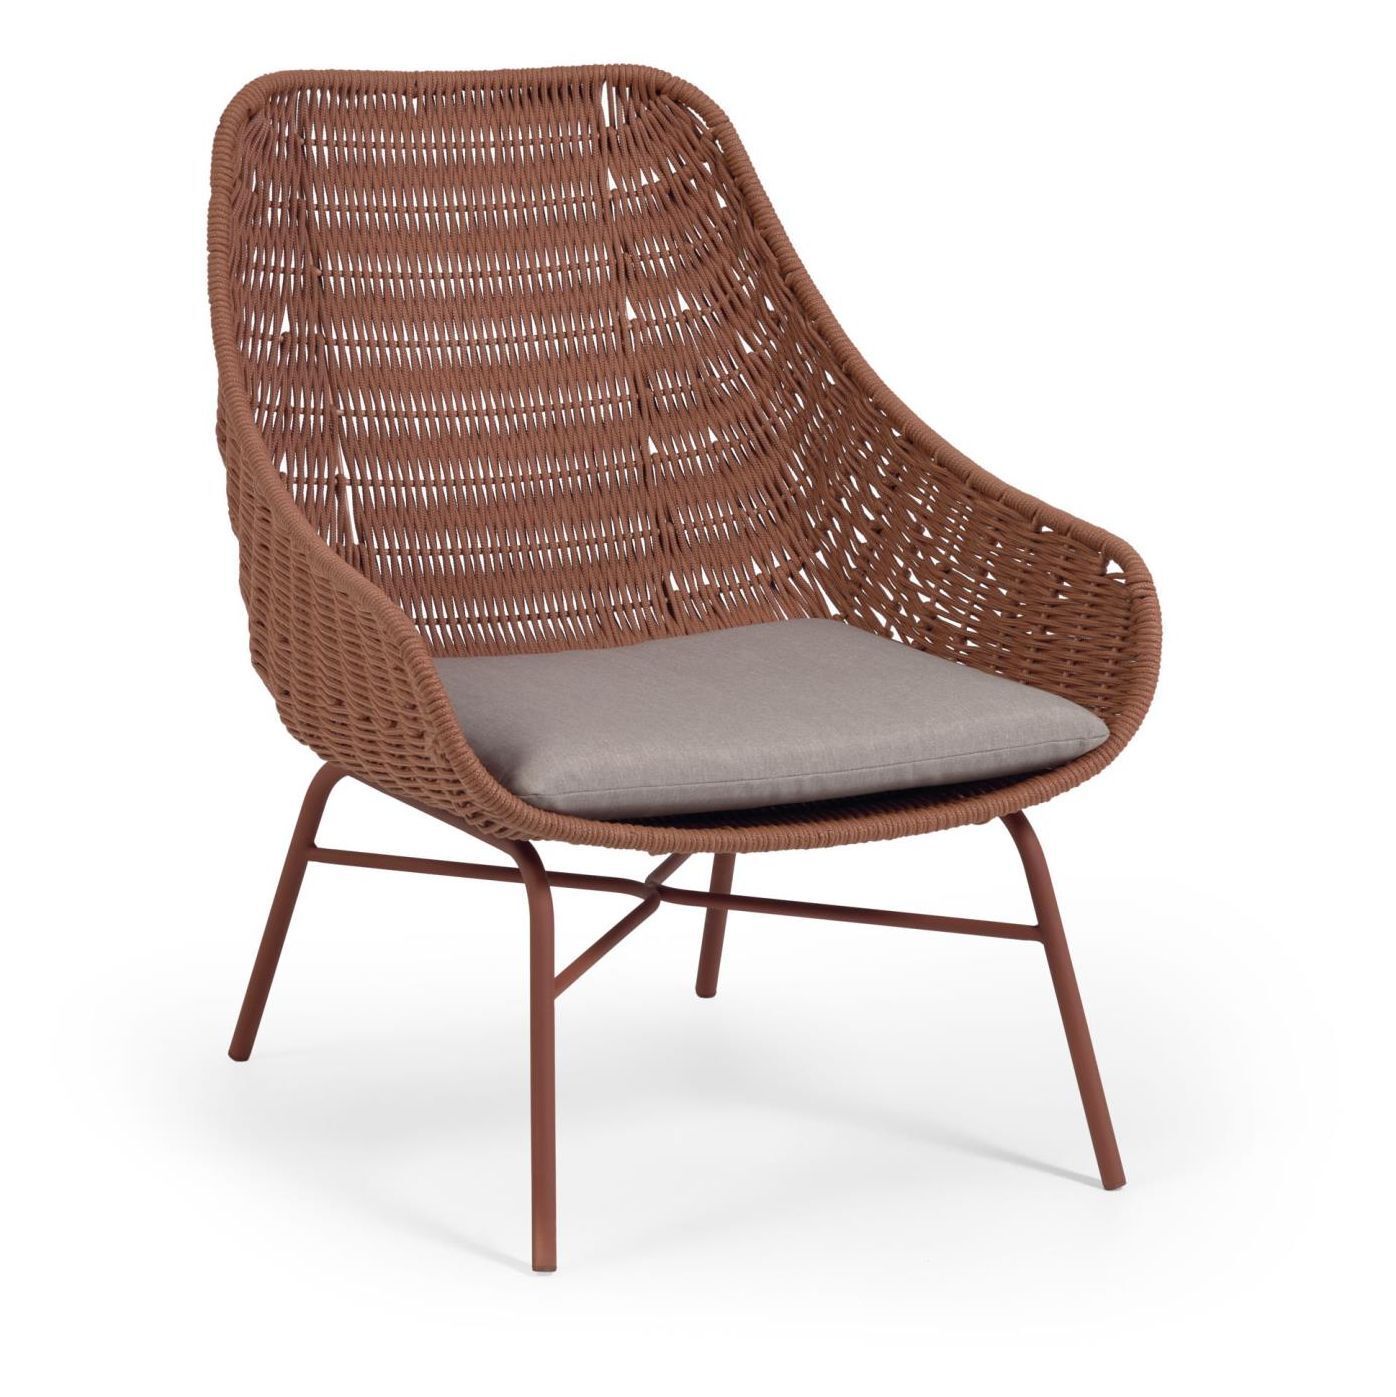 Kave Home LaForma Abeli Loungestol - Brown Oxide   Unoliving